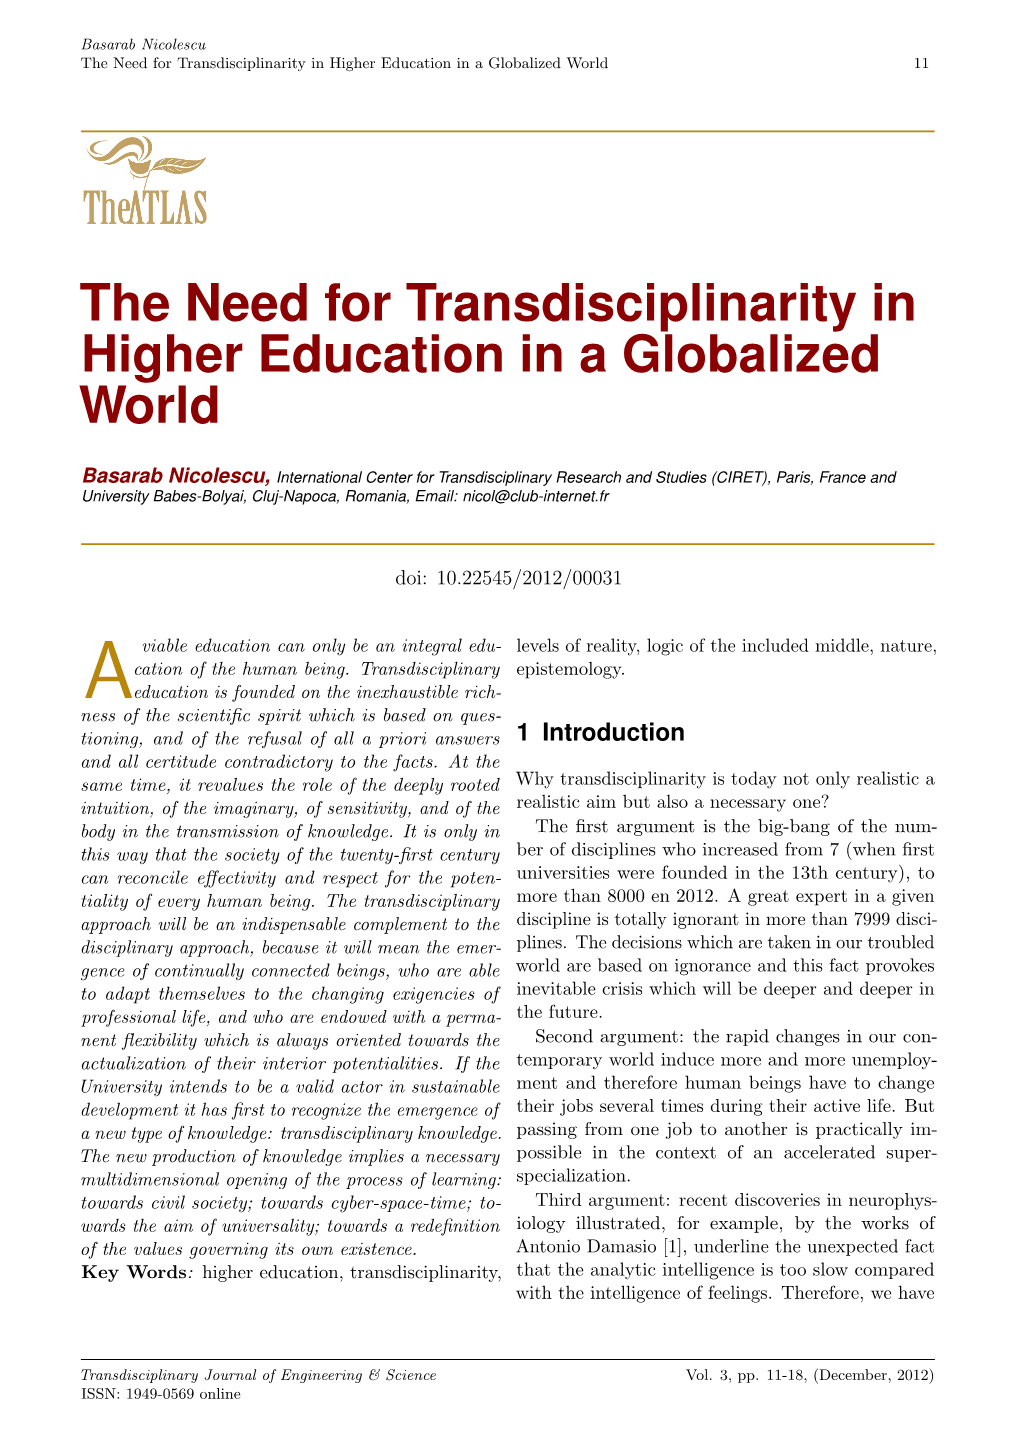 The Need for Transdisciplinarity in Higher Education in a Globalized World 11